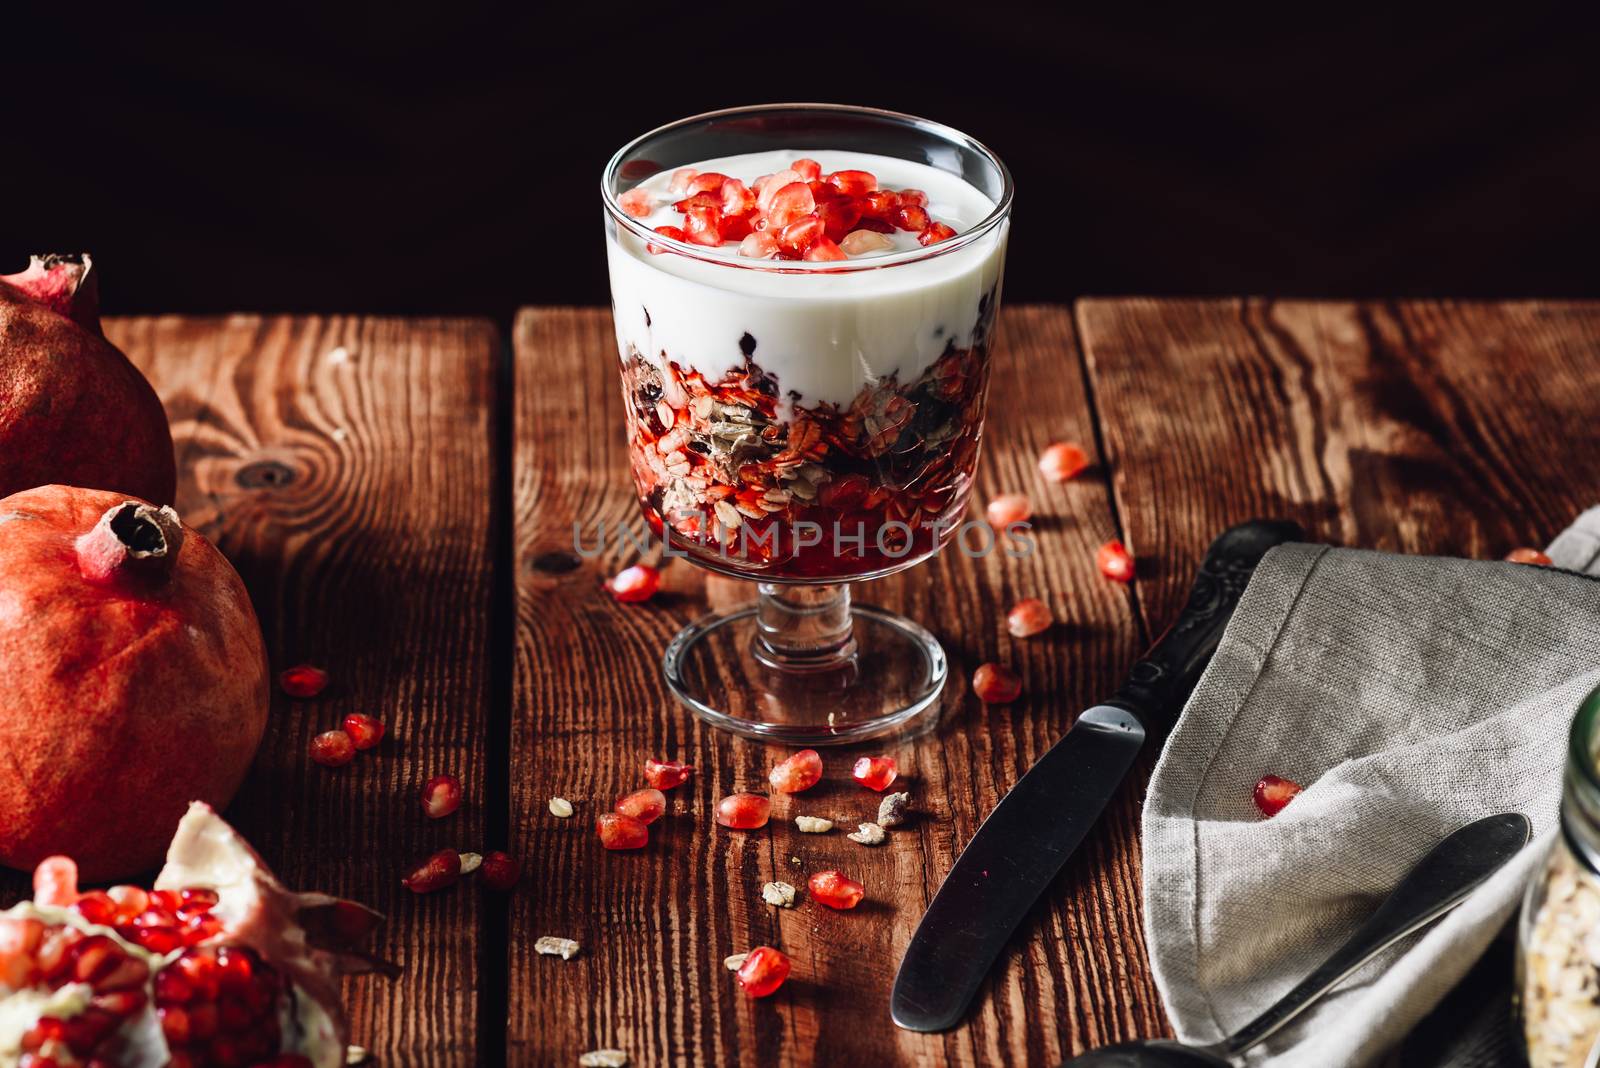 Cooked Dessert with Ingredients on Wooden Table. Series on Prepare Healthy Dessert with Pomegranate, Granola, Cream and Jam